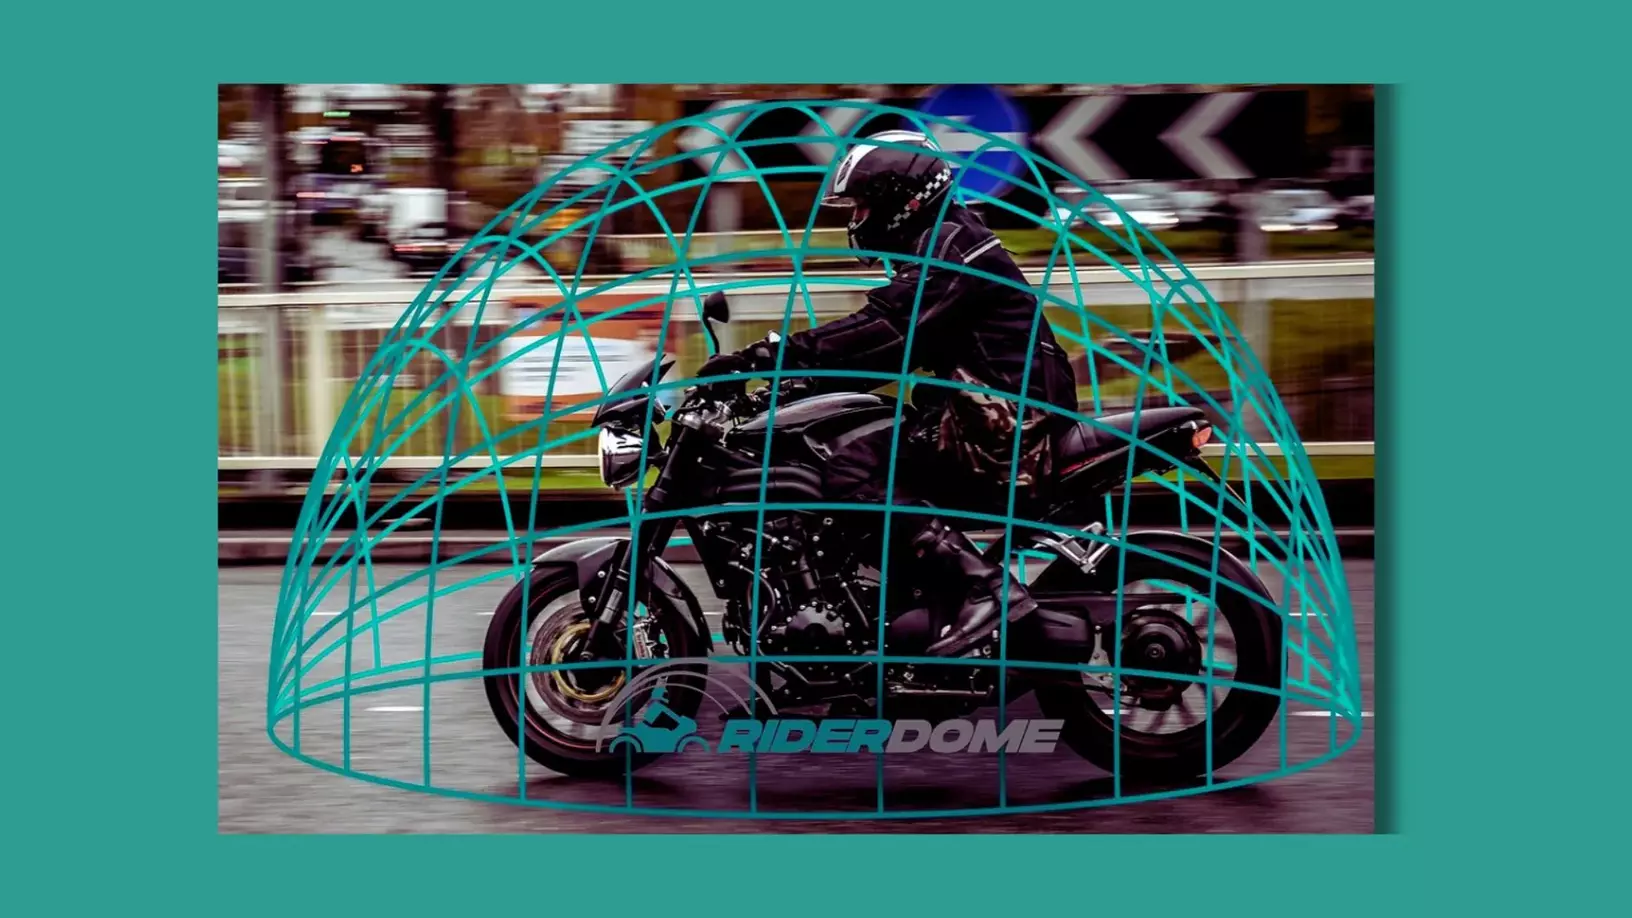 Rider Dome Raises $2.3M Funding For AI Motorcycle Safety Tech